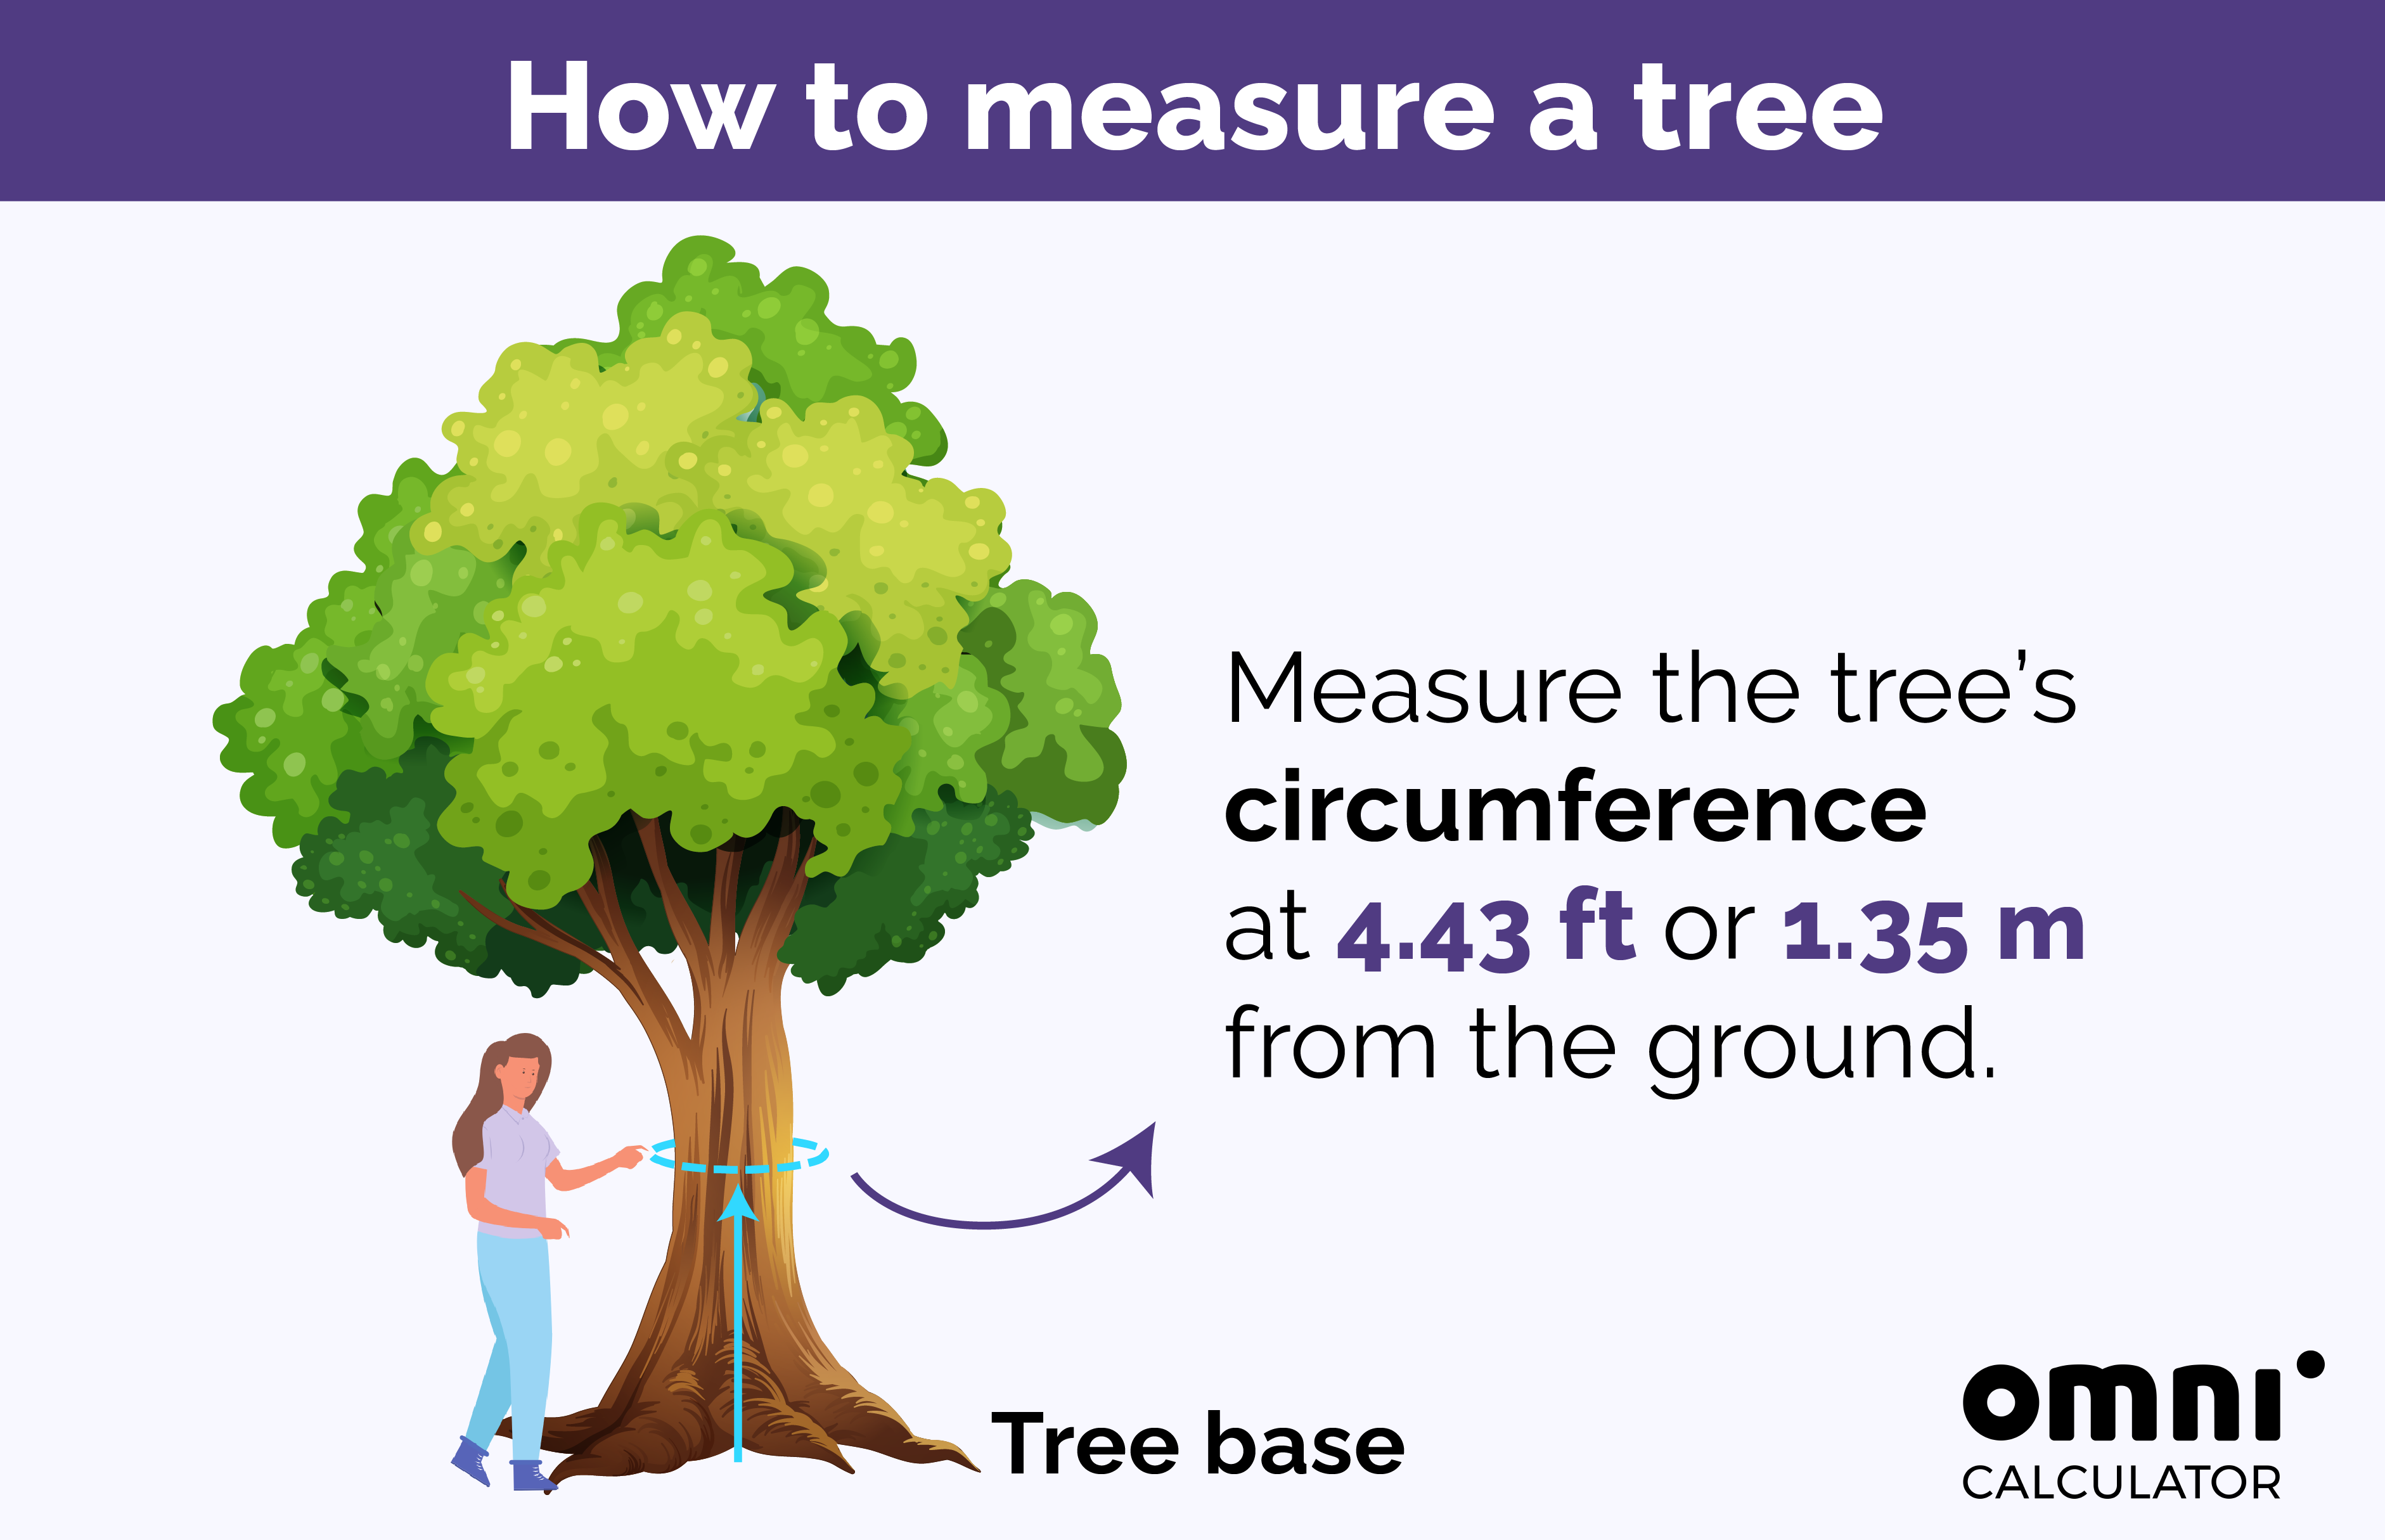 Image describing how to measure the circumference of a tree.